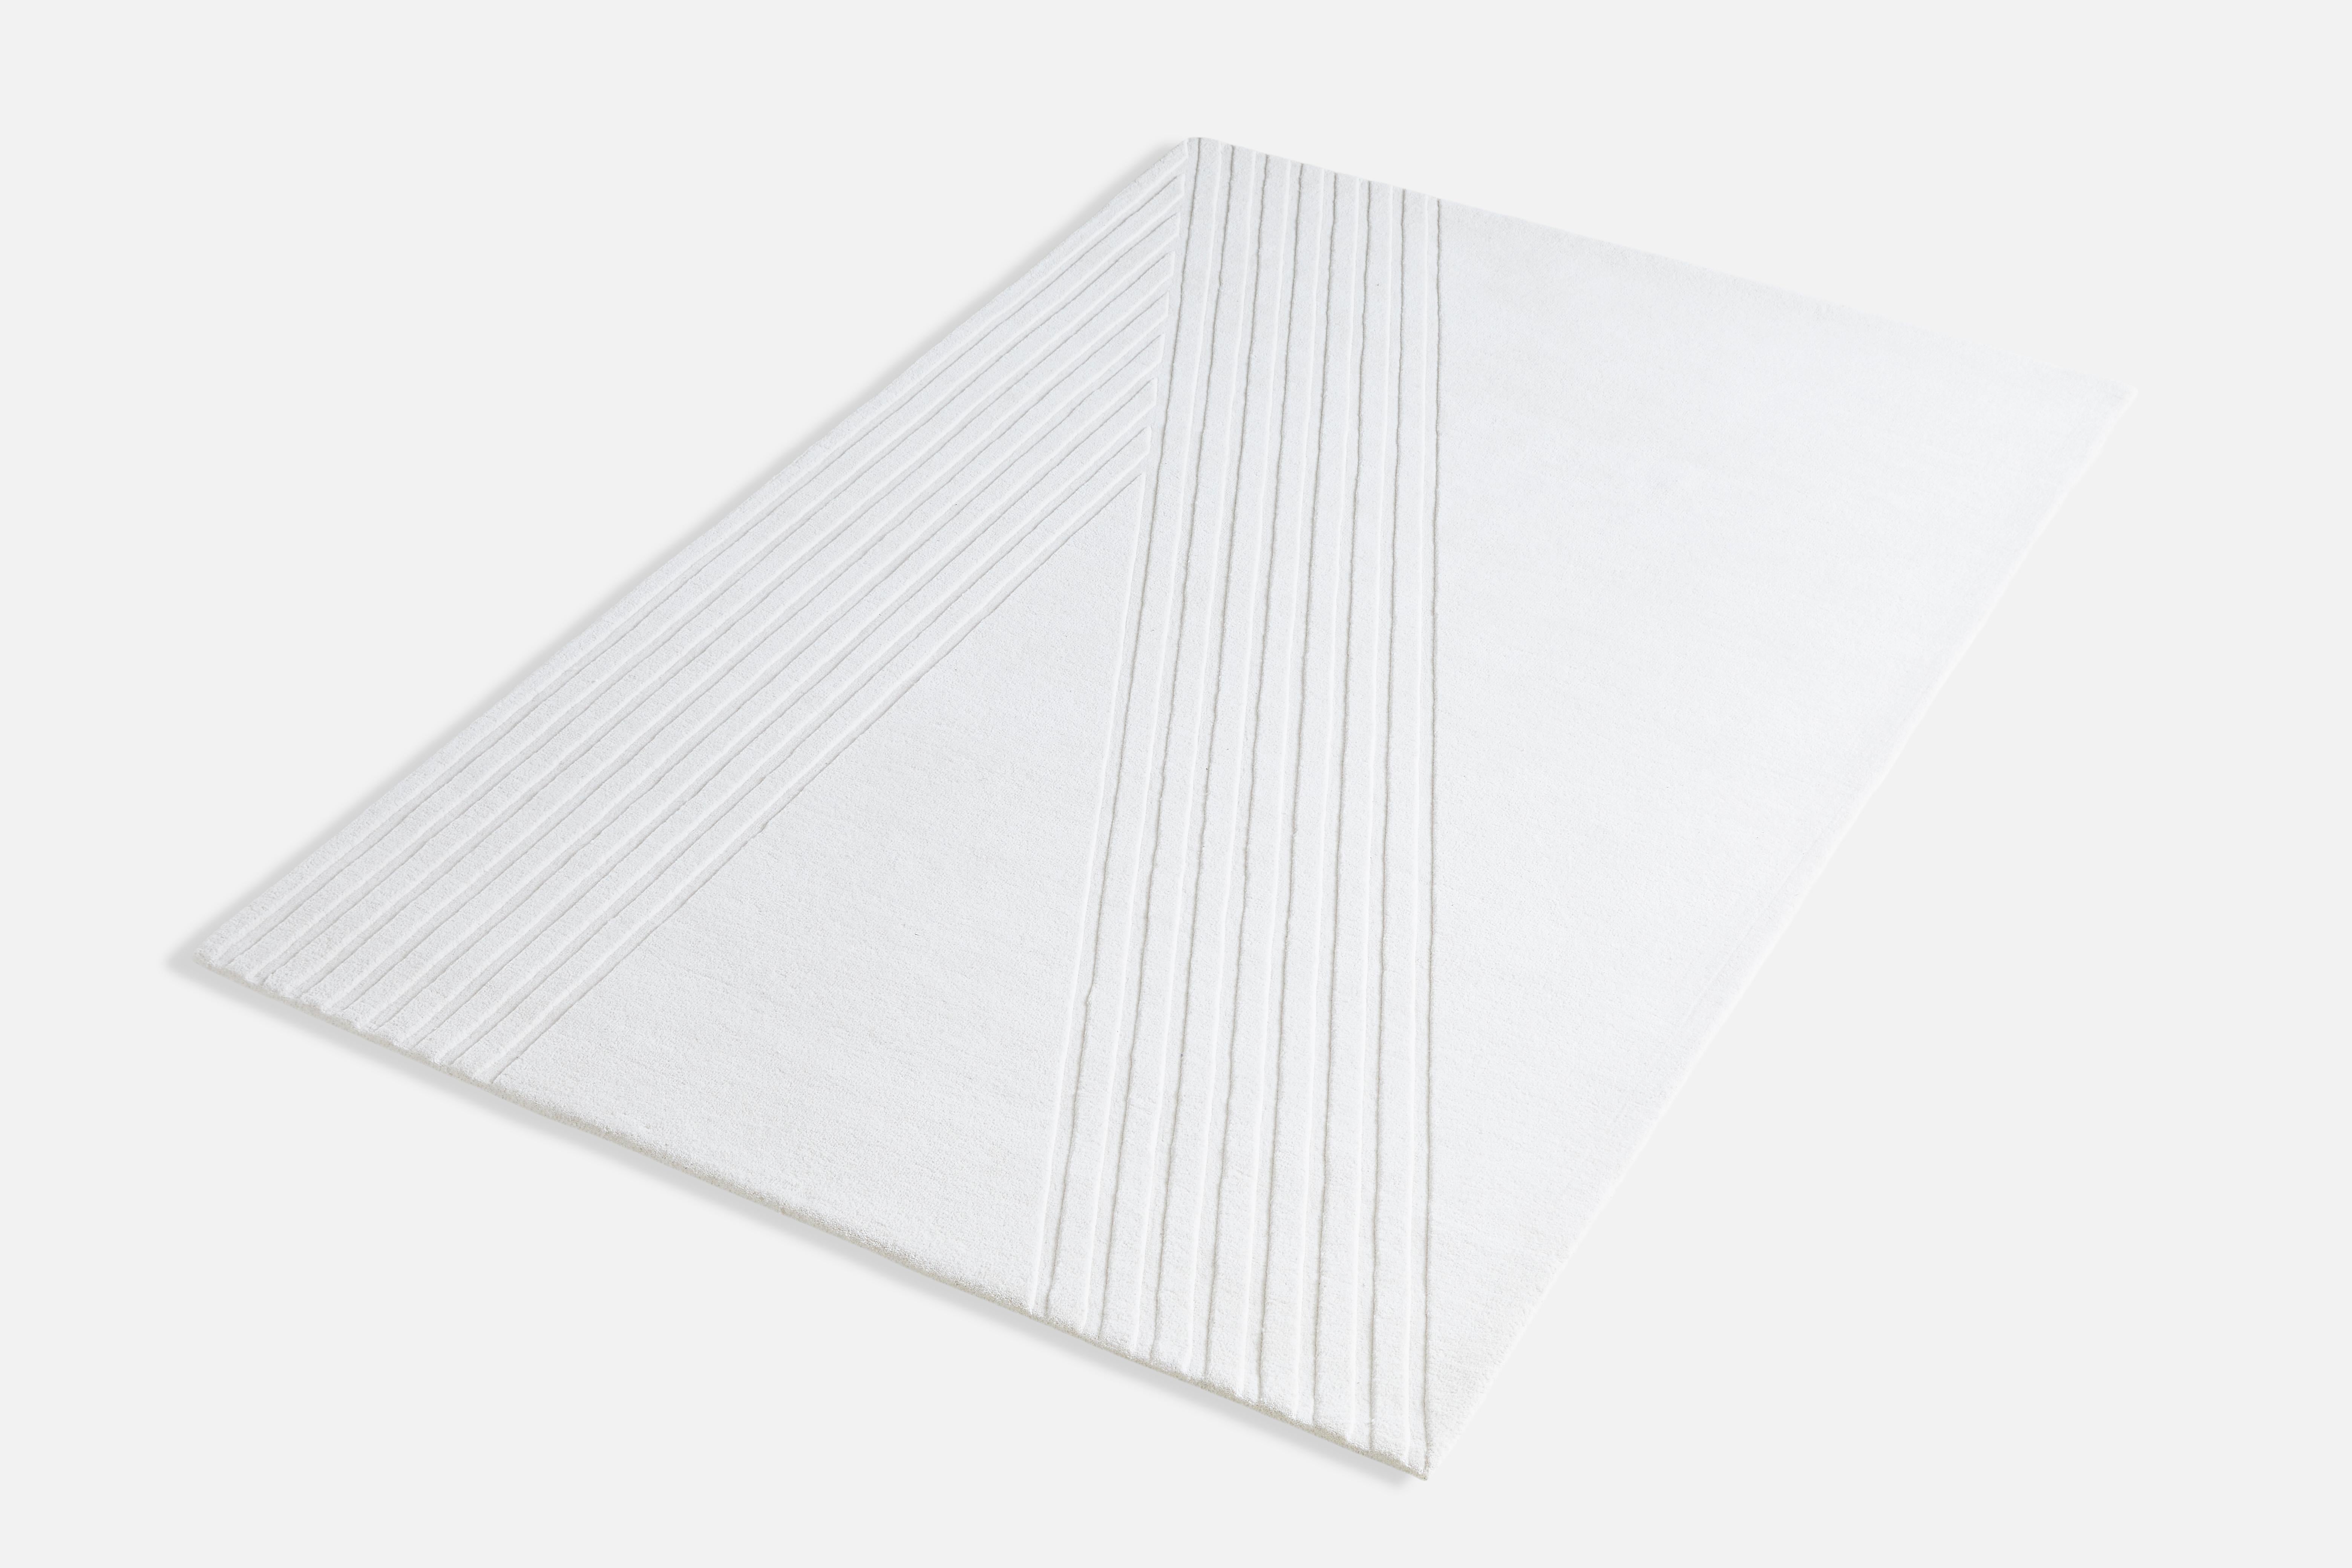 White Kyoto rug IV by AD Miller
Materials: 80% wool, 20% cotton.
Dimensions: W 200 x L 300 cm
Available in grey or off white.

The hand-tufted wool rug, Kyoto, takes its inspiration from the distinctive pattern found in traditional raked